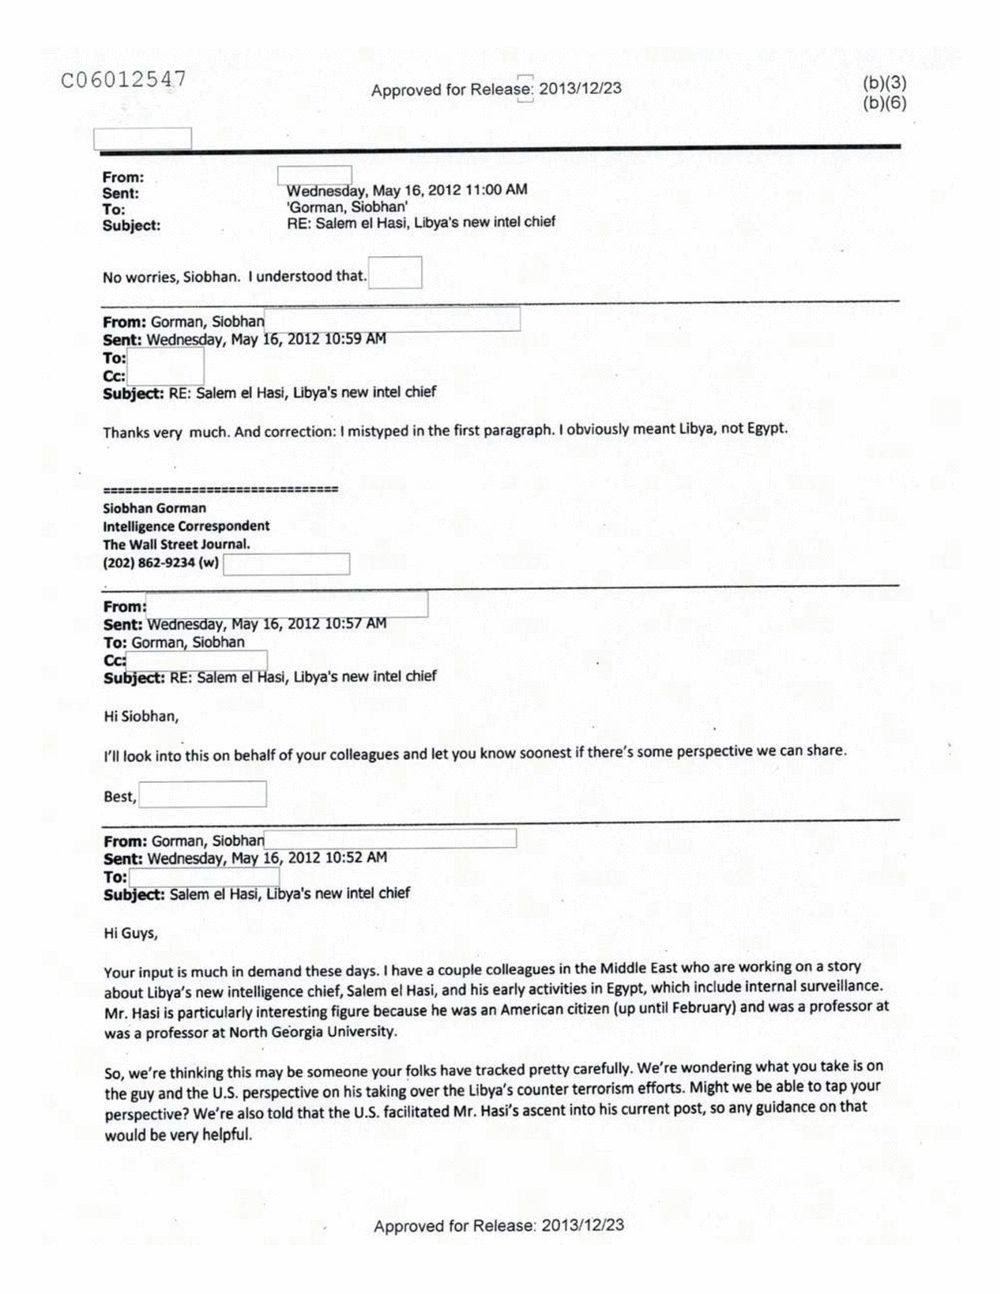 Page 82 from Email Correspondence Between Reporters and CIA Flacks